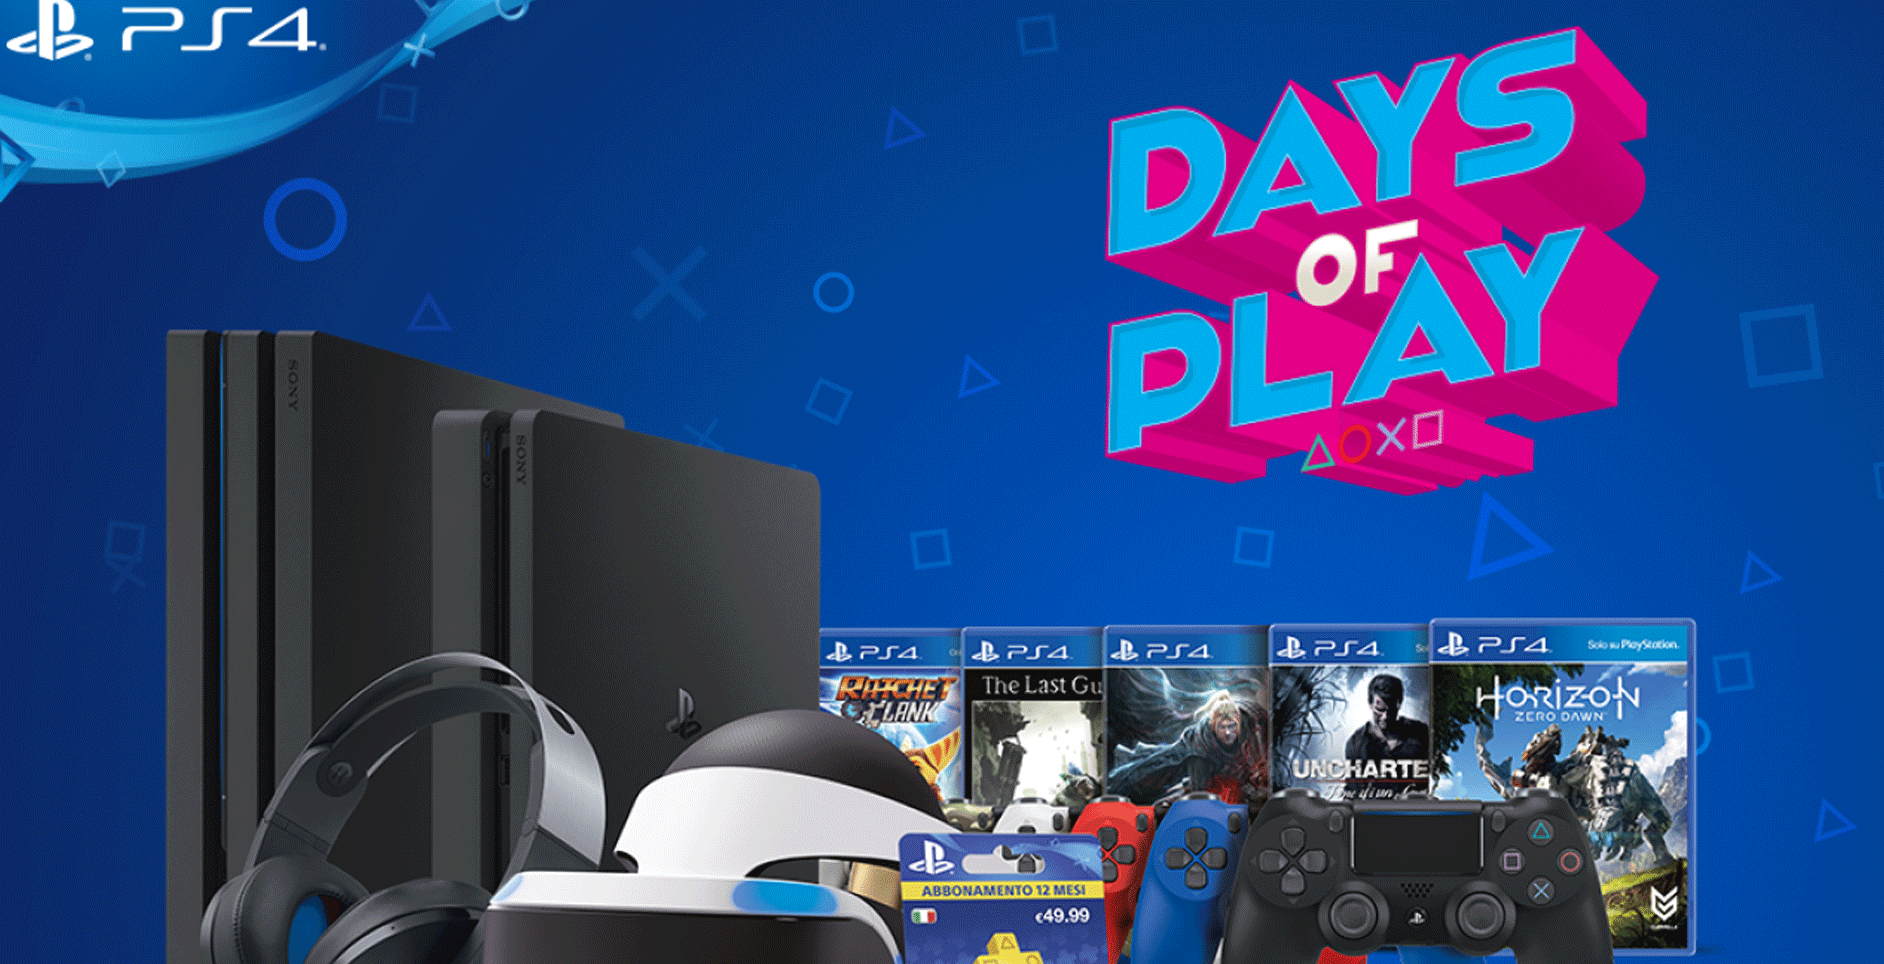 Playstation days. Last Day на плейстейшен. Airplay ps4. Play Day. PS Store Days of Play обложка в ВК.